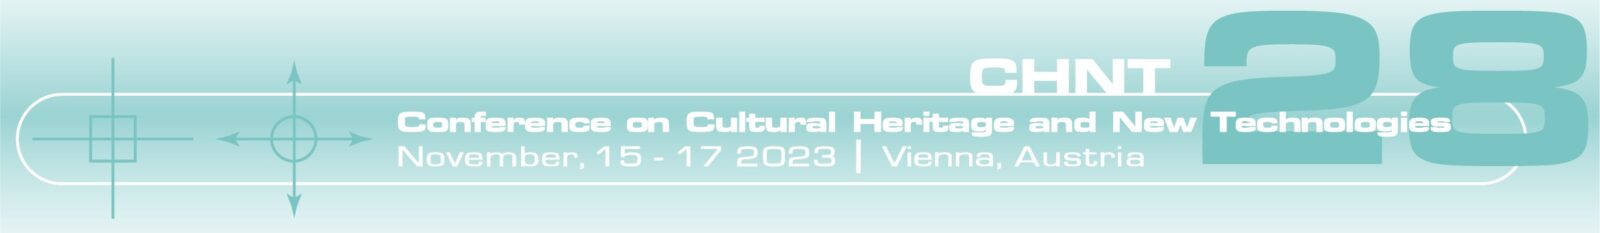 banner CHNT 28 conference on cultural heritage and new technologies november 2023 su fondo verde acqua